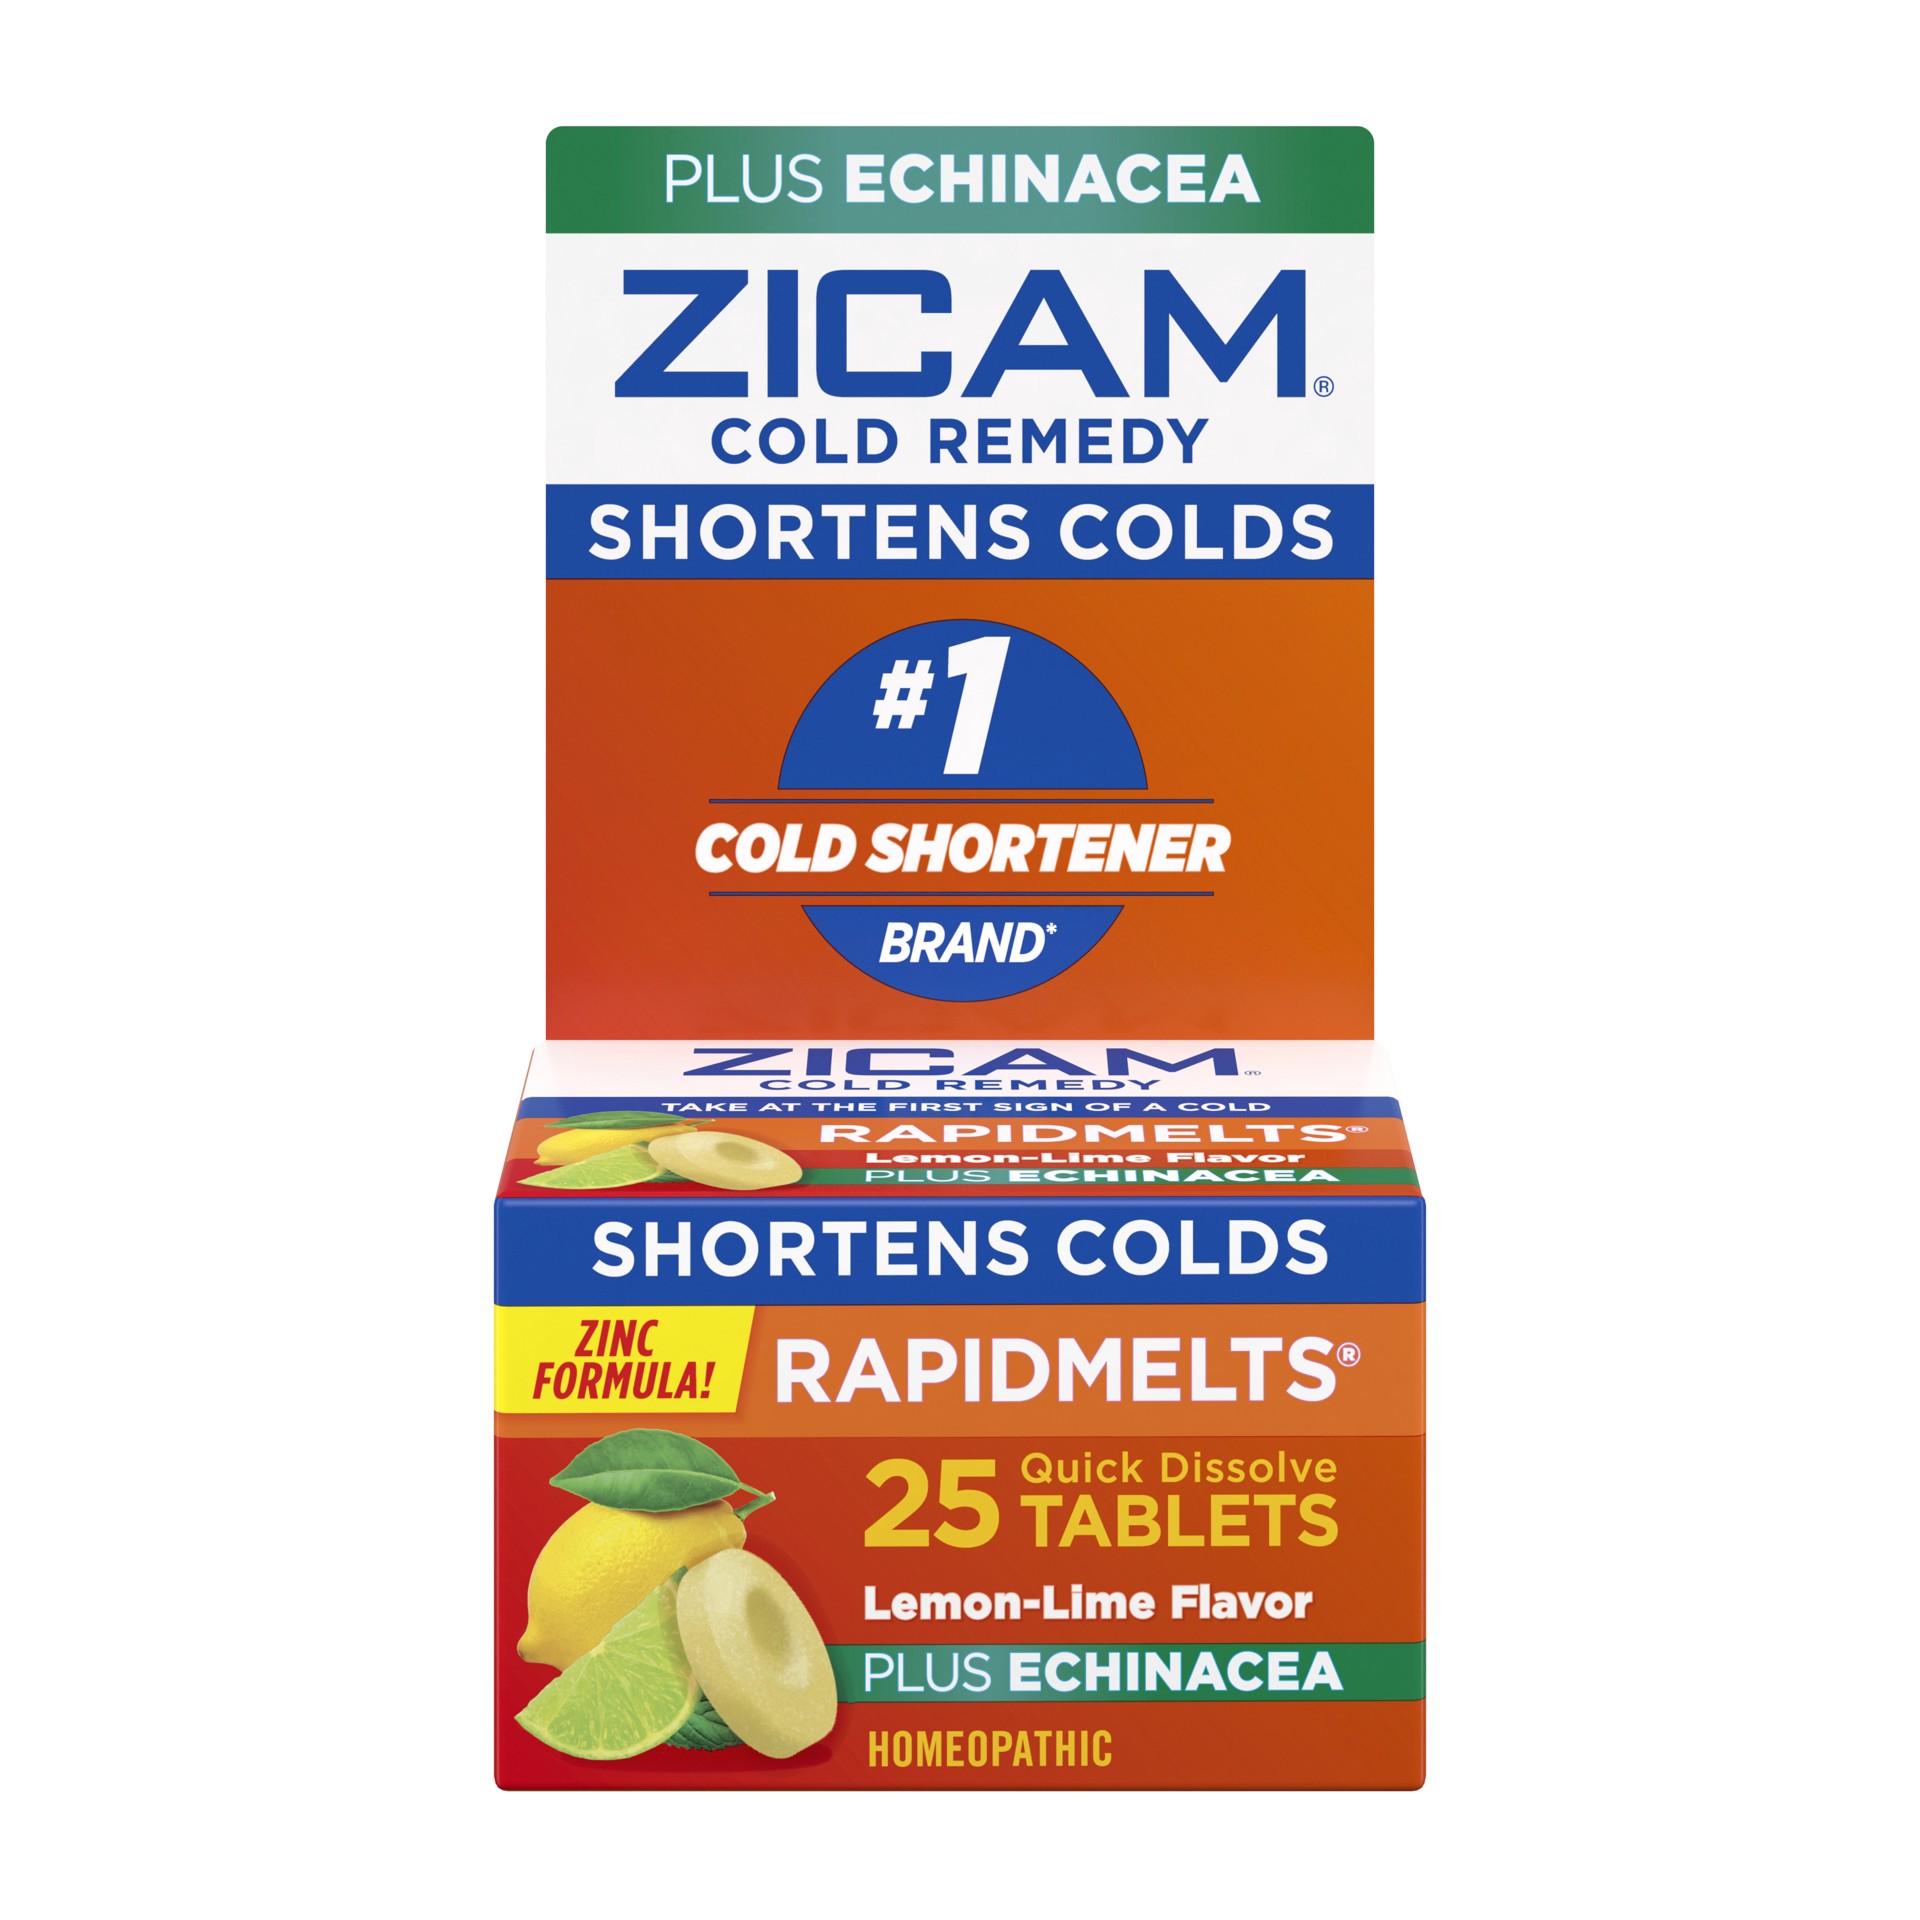 slide 1 of 9, Zicam Cold Remedy Zinc Rapidmelts, Lemon Lime Flavor, with Echinacea, Homeopathic, Cold Shortening Medicine, Shortens Cold Duration, Sugar-Free, Dye-Free, 18 Count, 25 ct